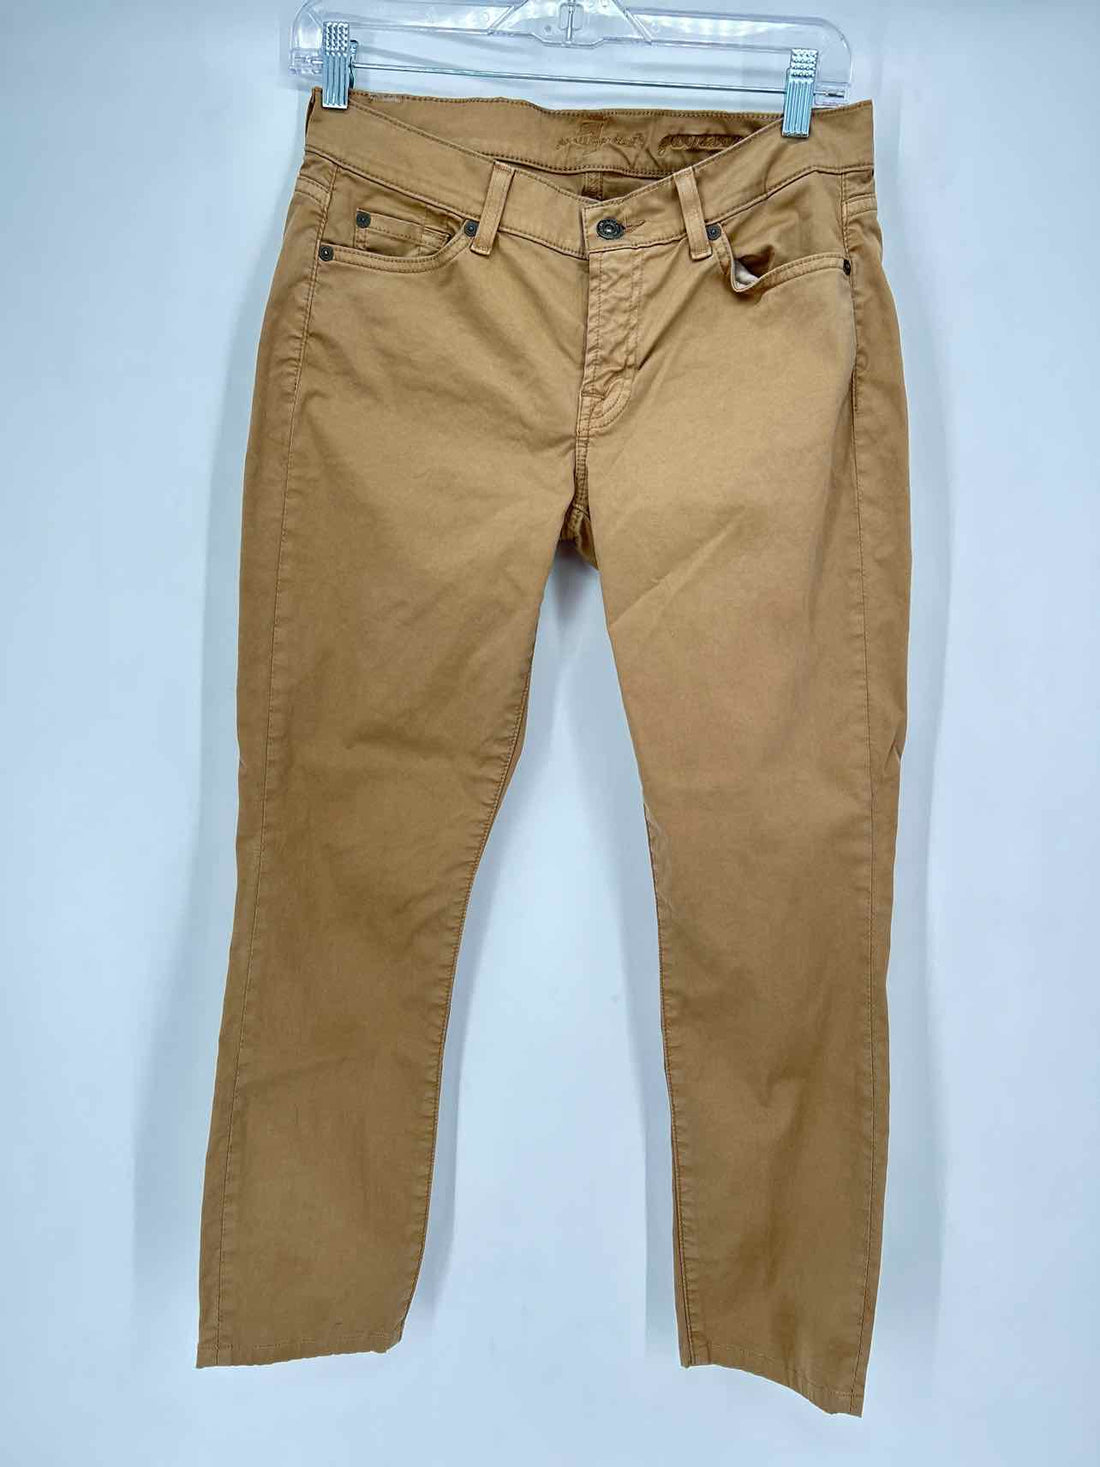 7 For All Mankind Size 28 Tan Pants